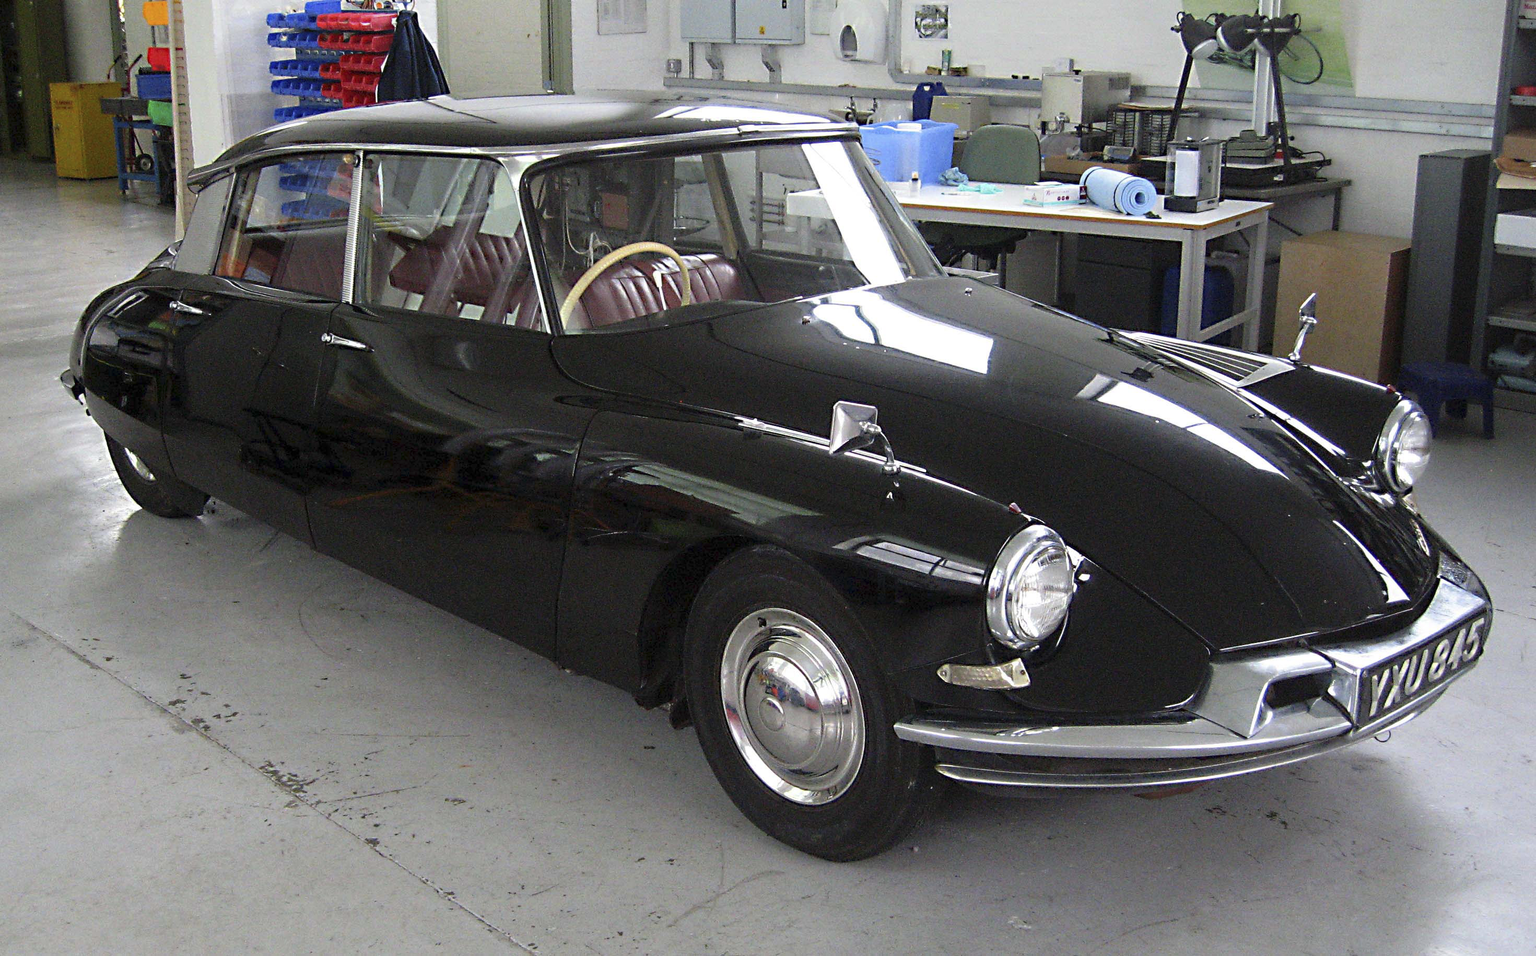 Citroen DS19 automatically-controlled car at the Science Museum, Wroughton